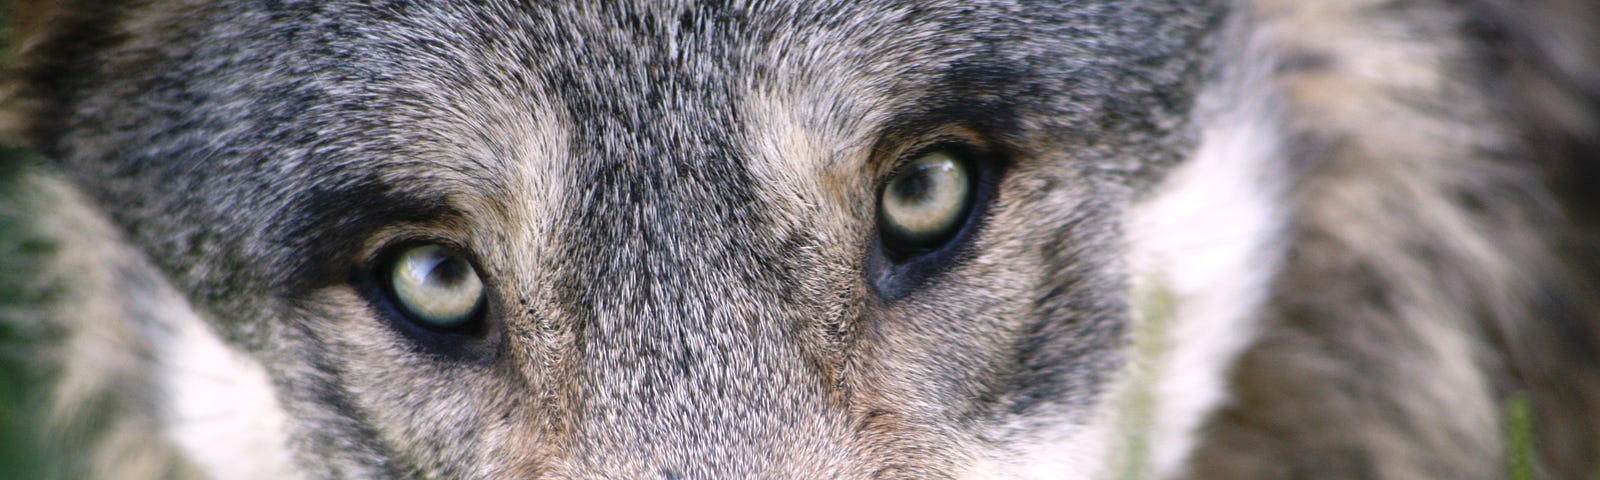 Brown and gray wolf like animal face close up